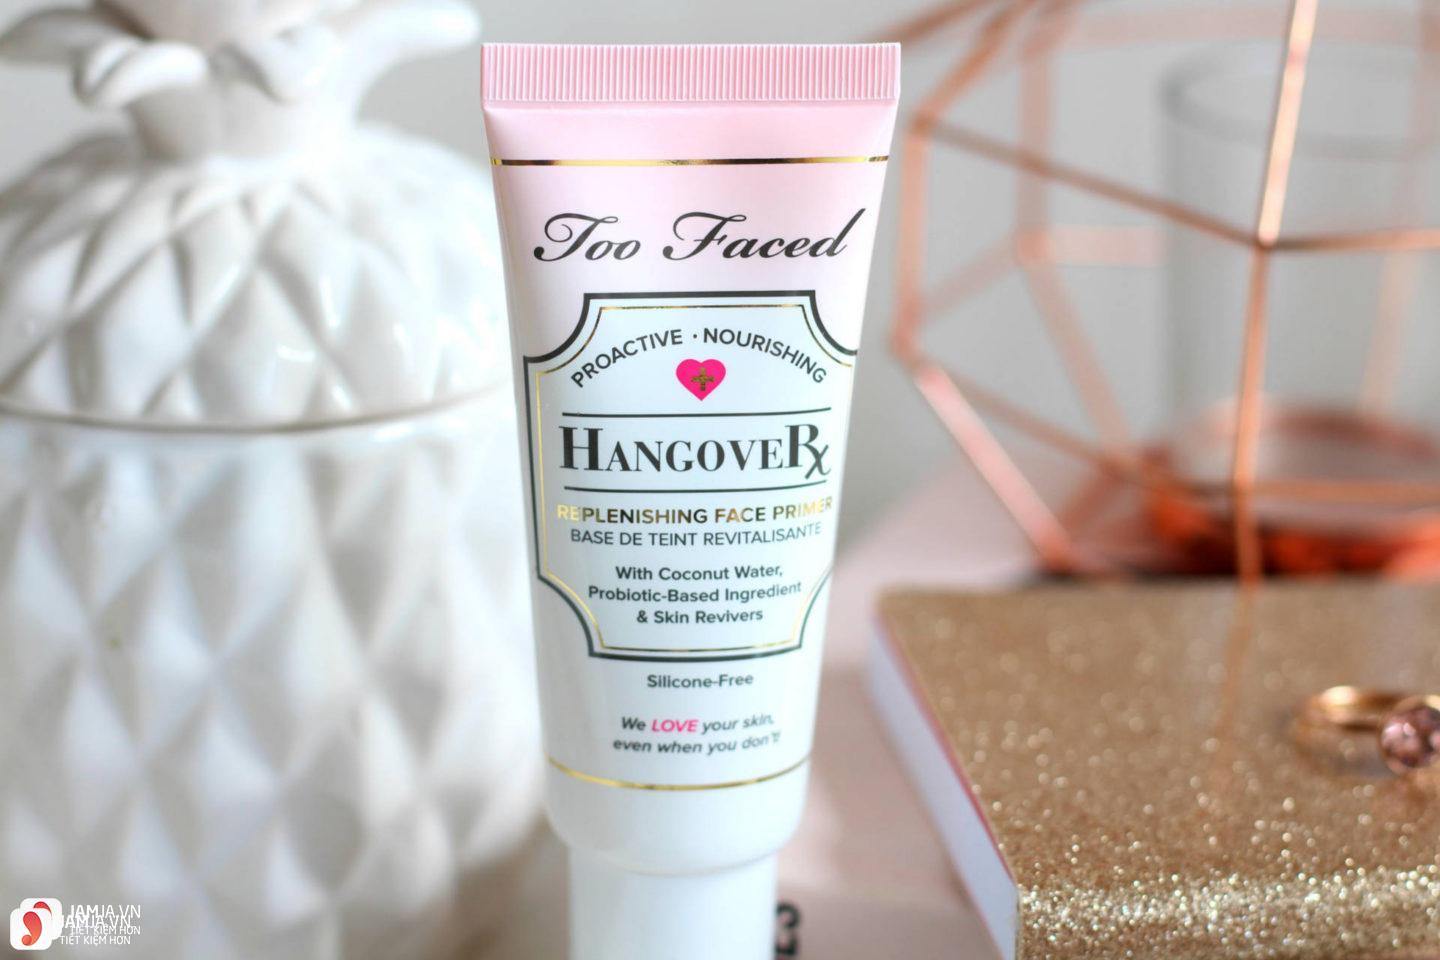 Too faced Hangover Replenishing Face Primer & Booster